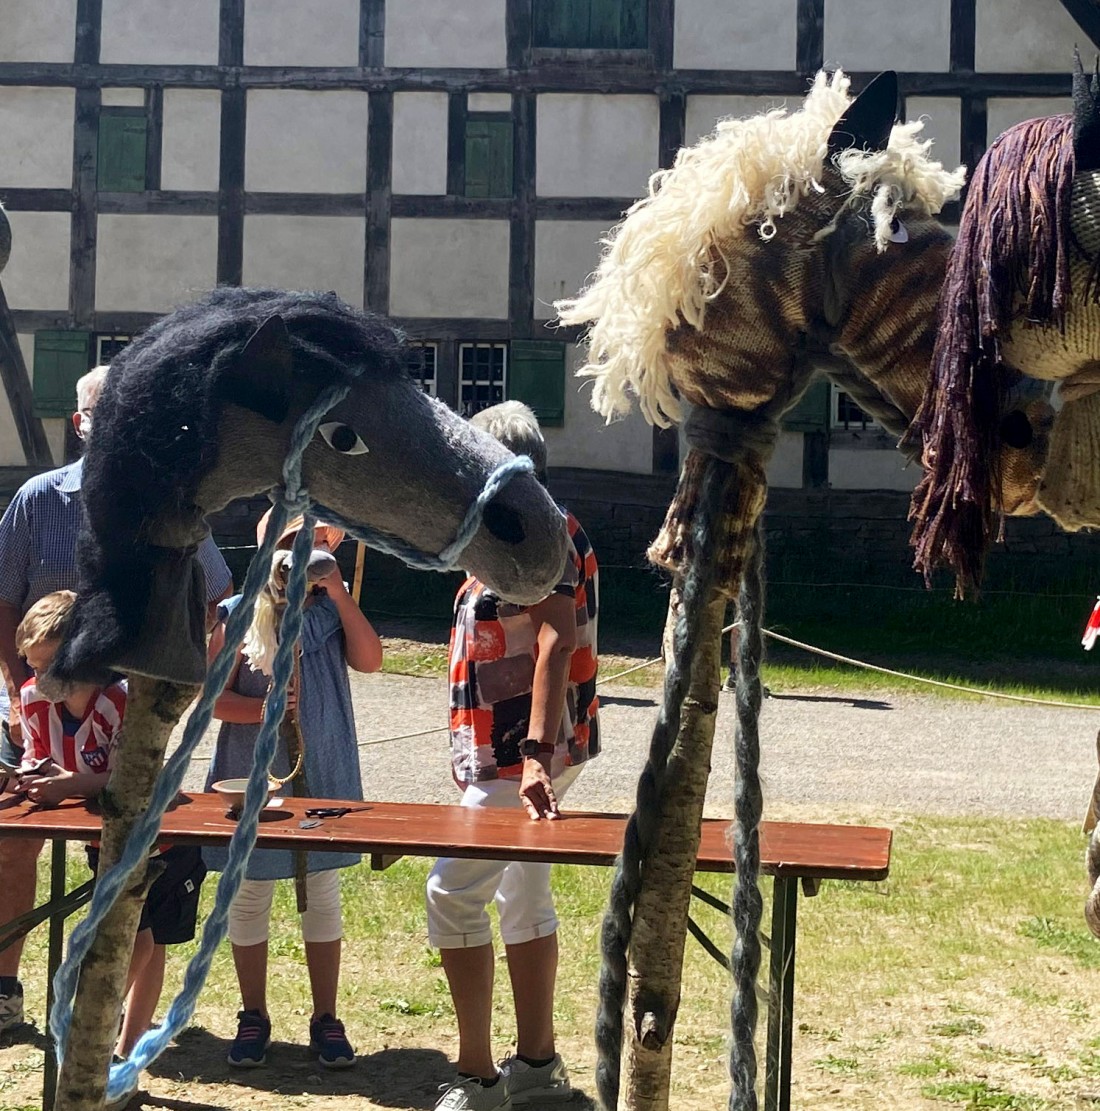 Hobby horses in front of a half-timbered house